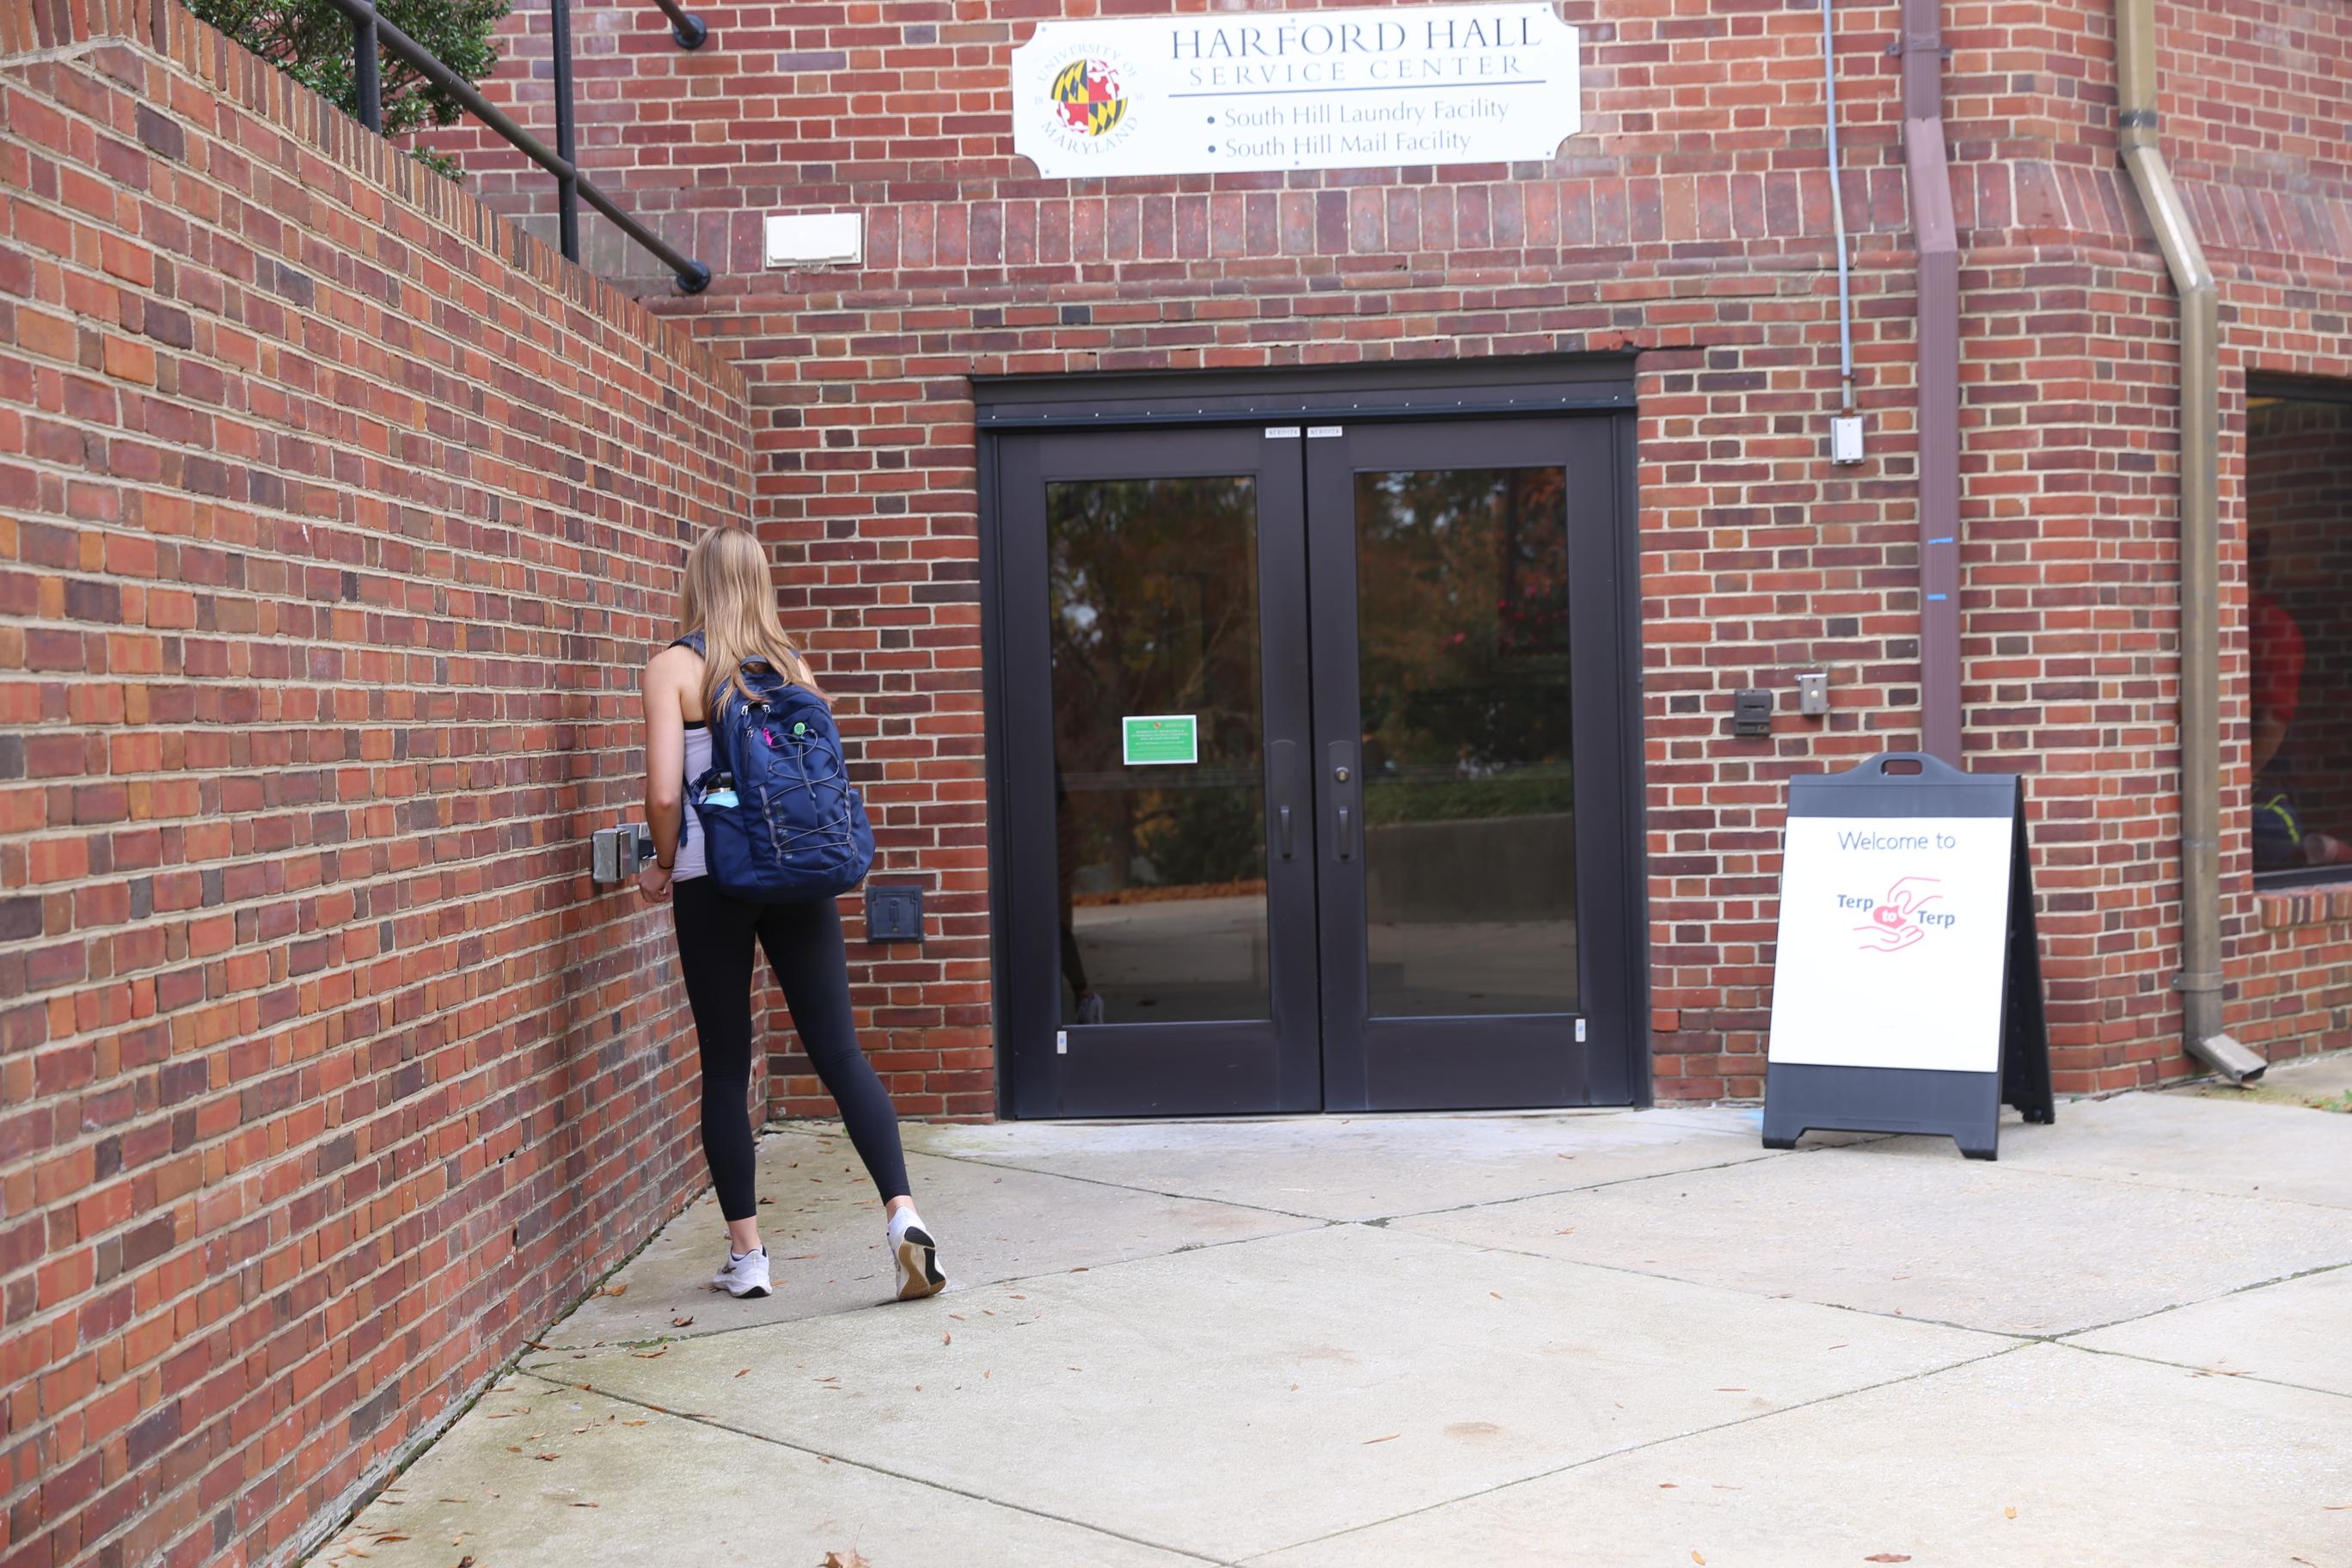 student swiping key to access harford hall through the service entrance